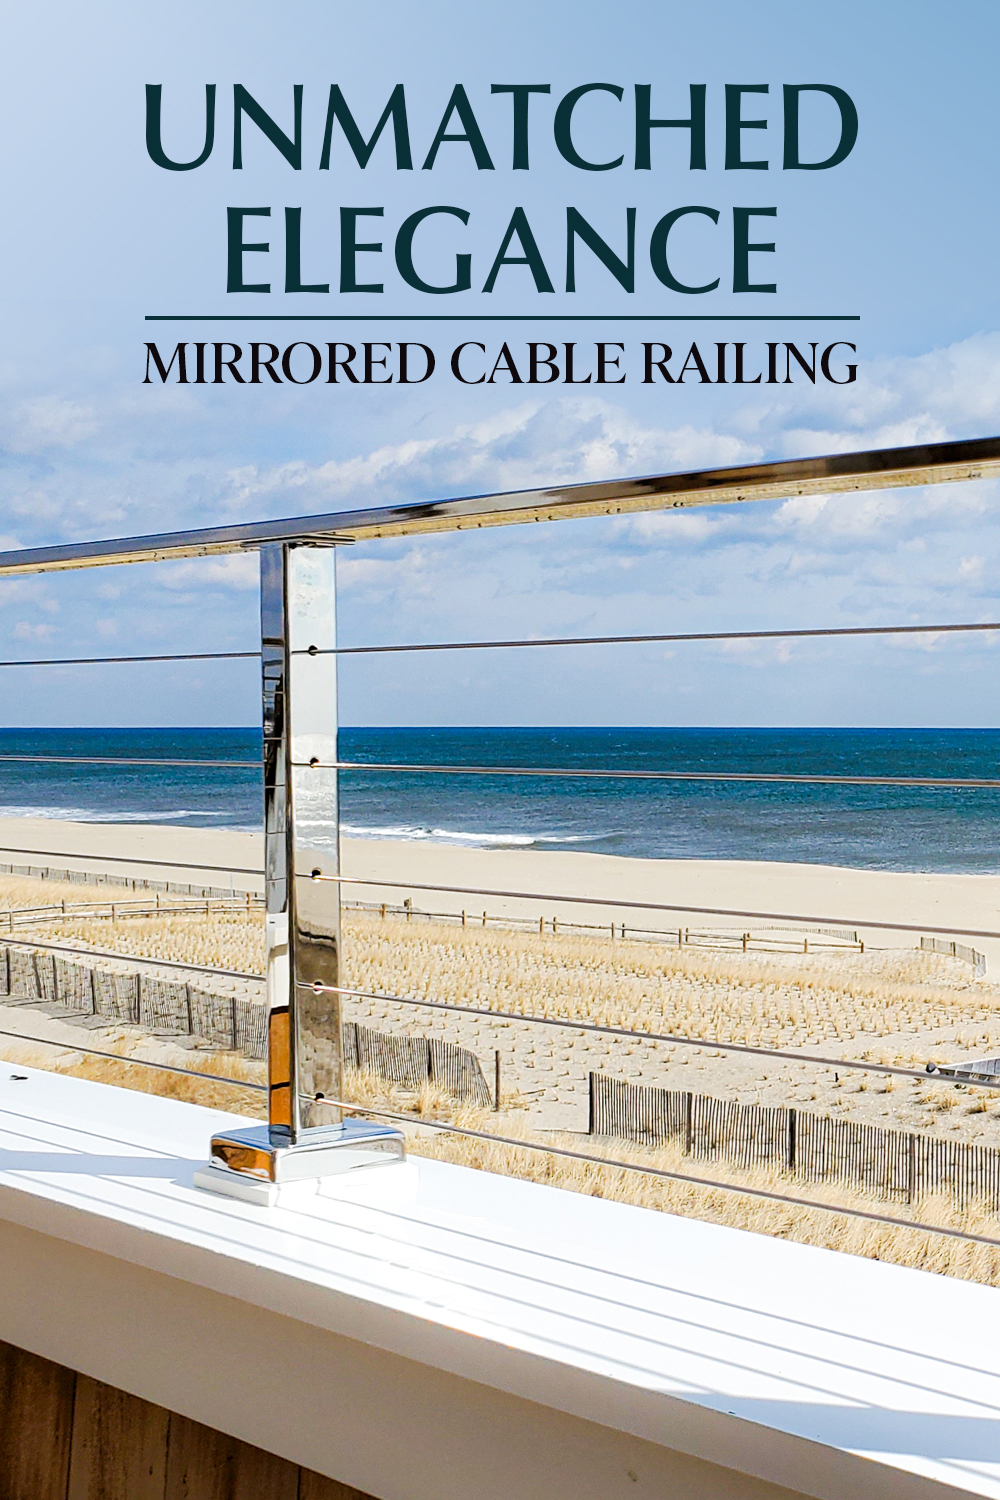 Luxury High-End Stainless Steel Cable Railing with Mirror Finish